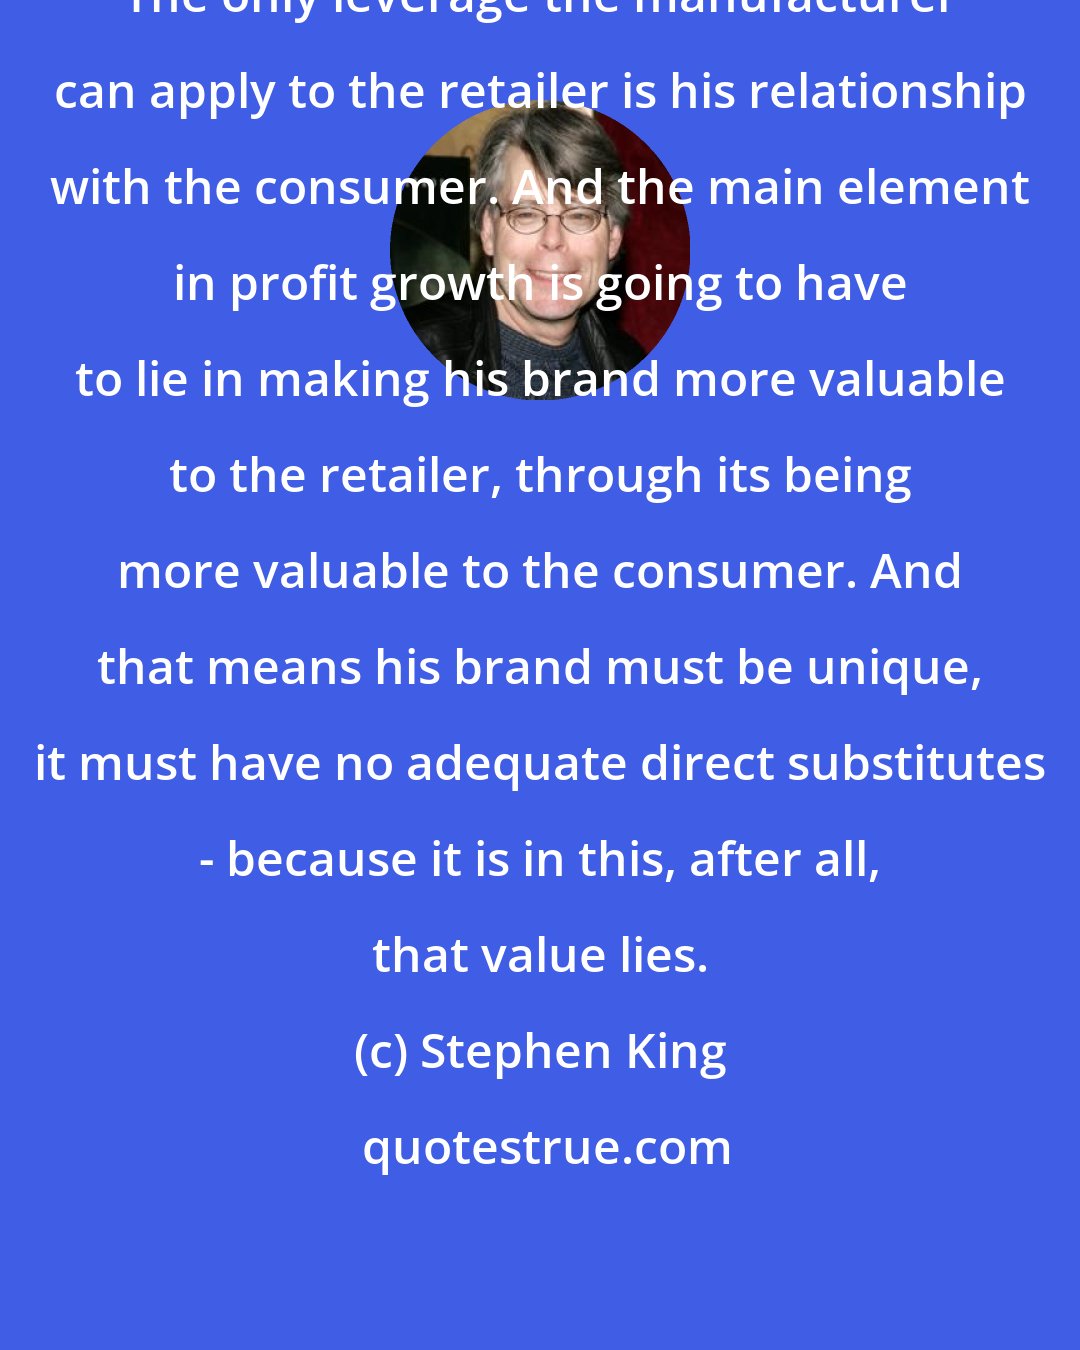 Stephen King: The only leverage the manufacturer can apply to the retailer is his relationship with the consumer. And the main element in profit growth is going to have to lie in making his brand more valuable to the retailer, through its being more valuable to the consumer. And that means his brand must be unique, it must have no adequate direct substitutes - because it is in this, after all, that value lies.